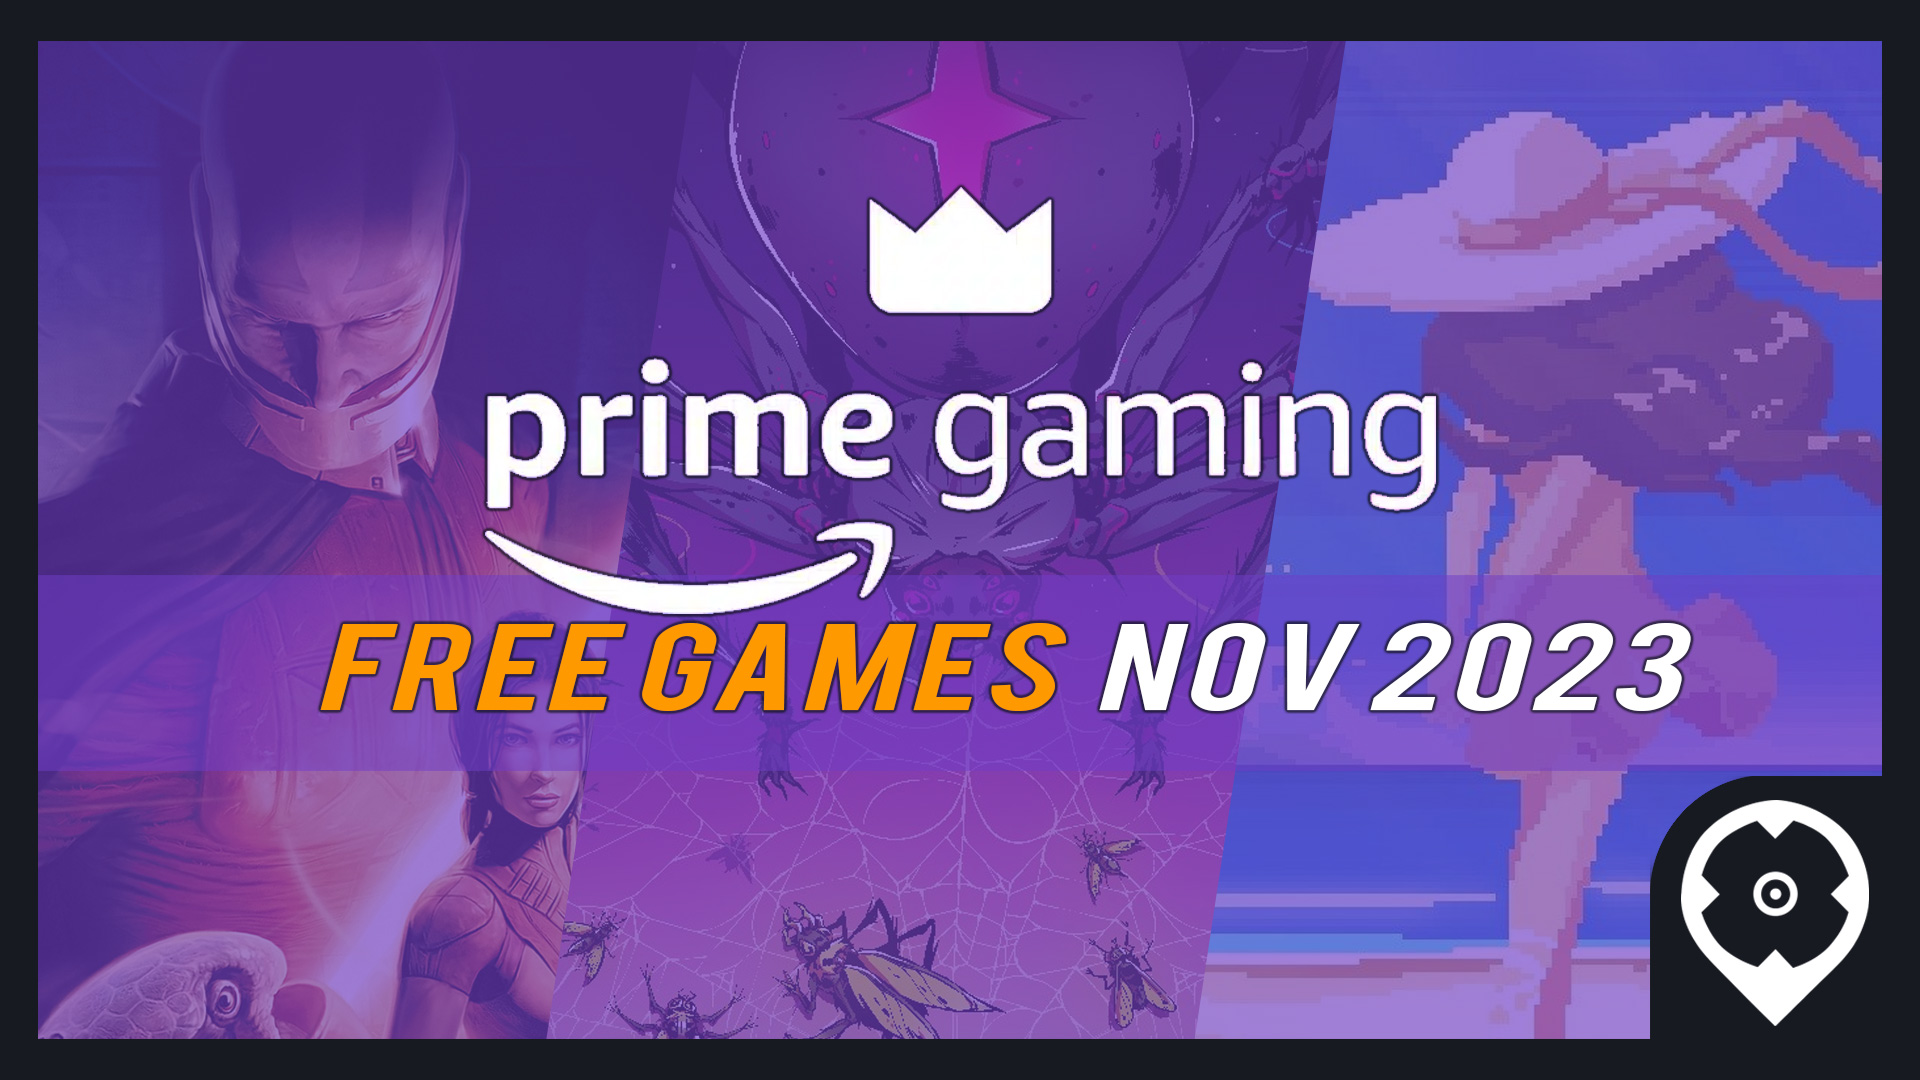 FREE League of Legends: Prime Gaming Capsule for